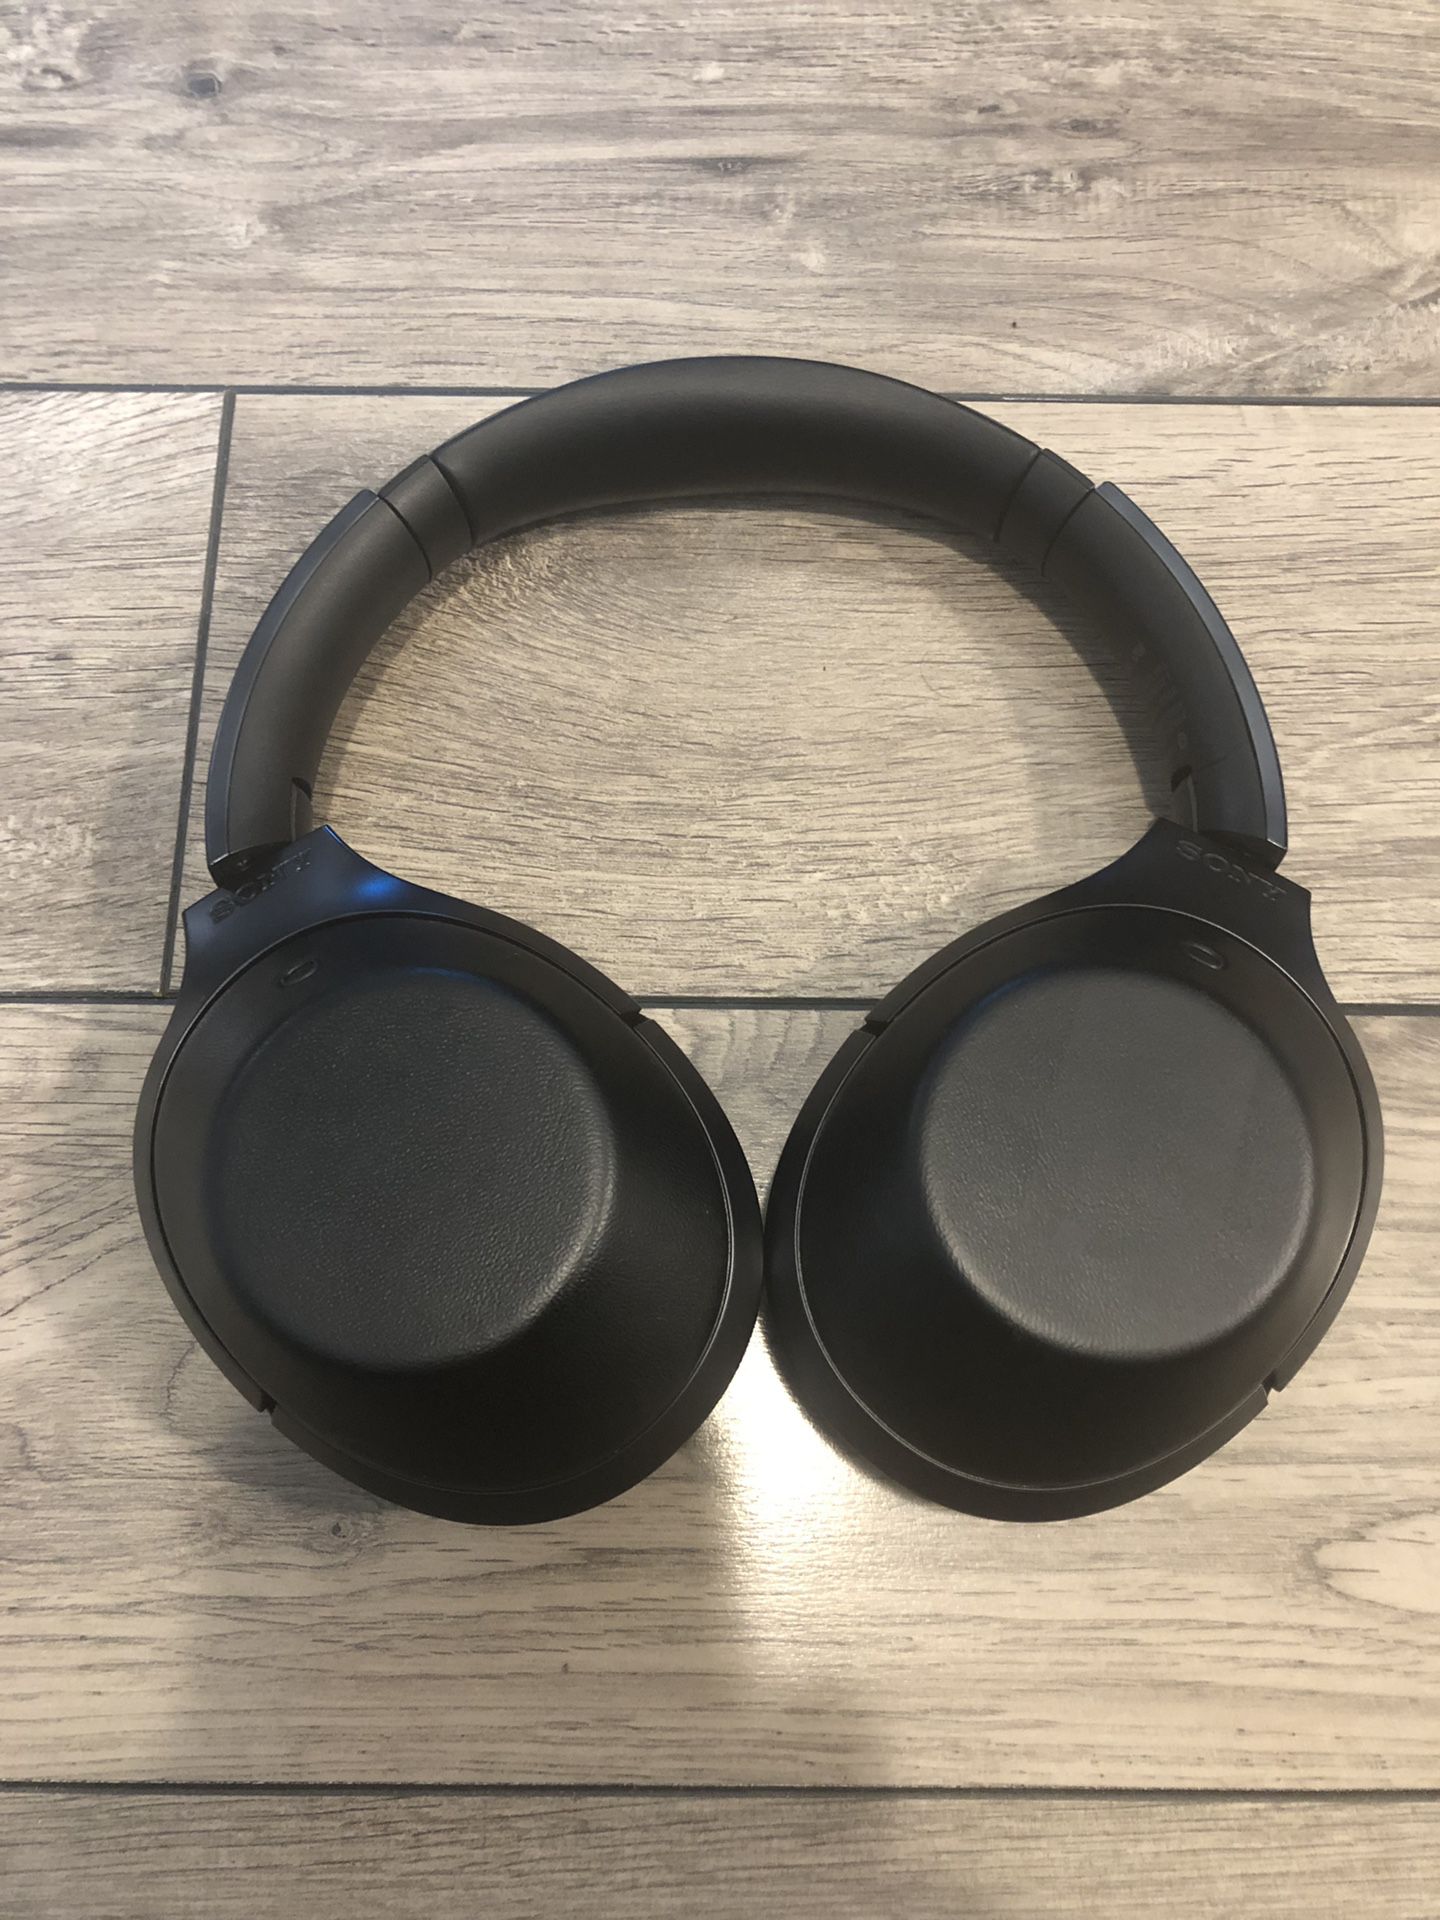 Sony Noise Cancelling Bluetooth Headphones / MDR-1000X